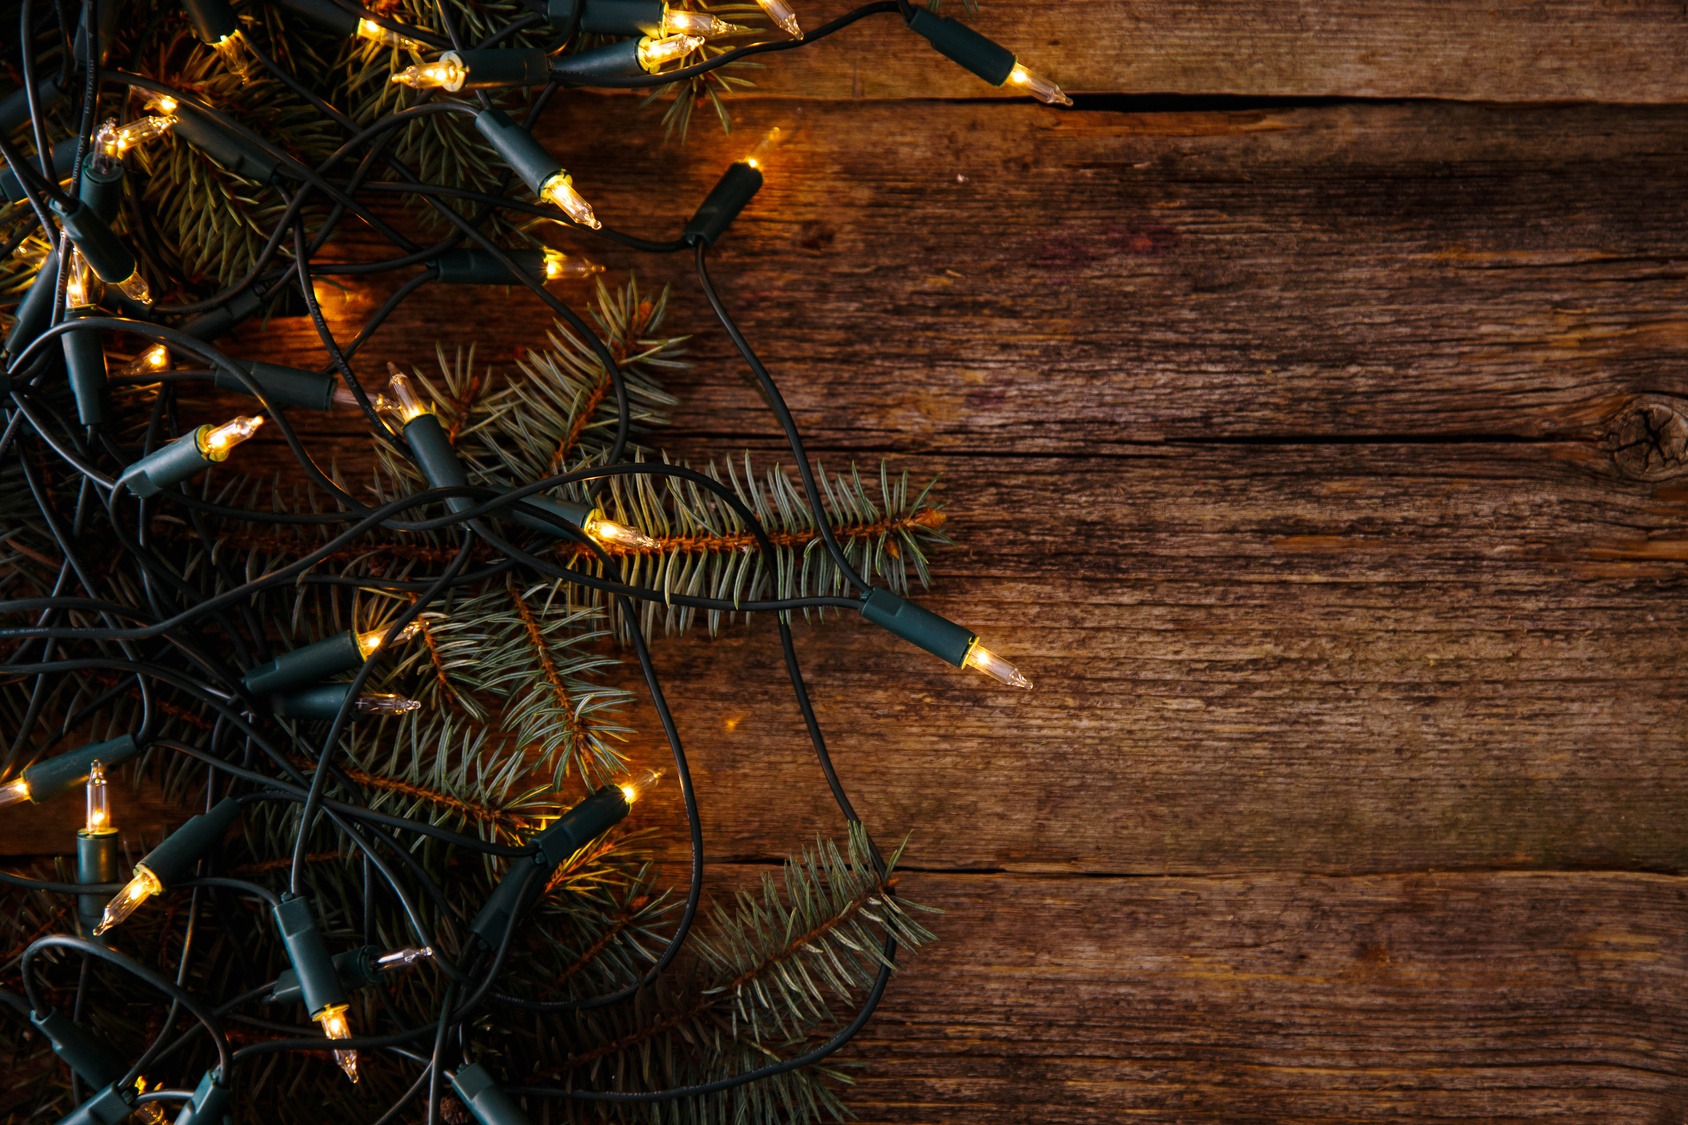 Safety Tips for Illuminating the Home With Holiday Cheer